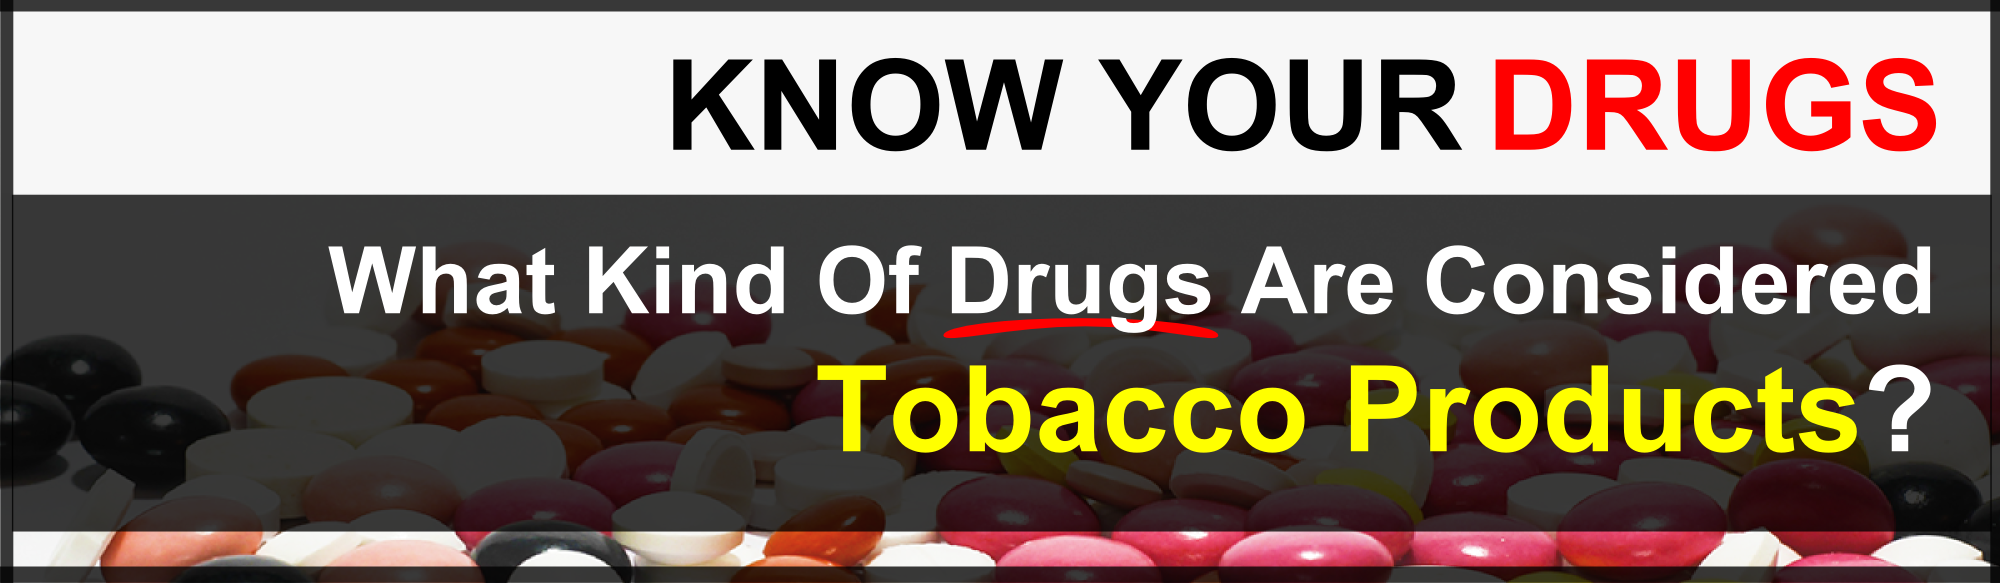 What kind of drugs are considered Tobacco Products